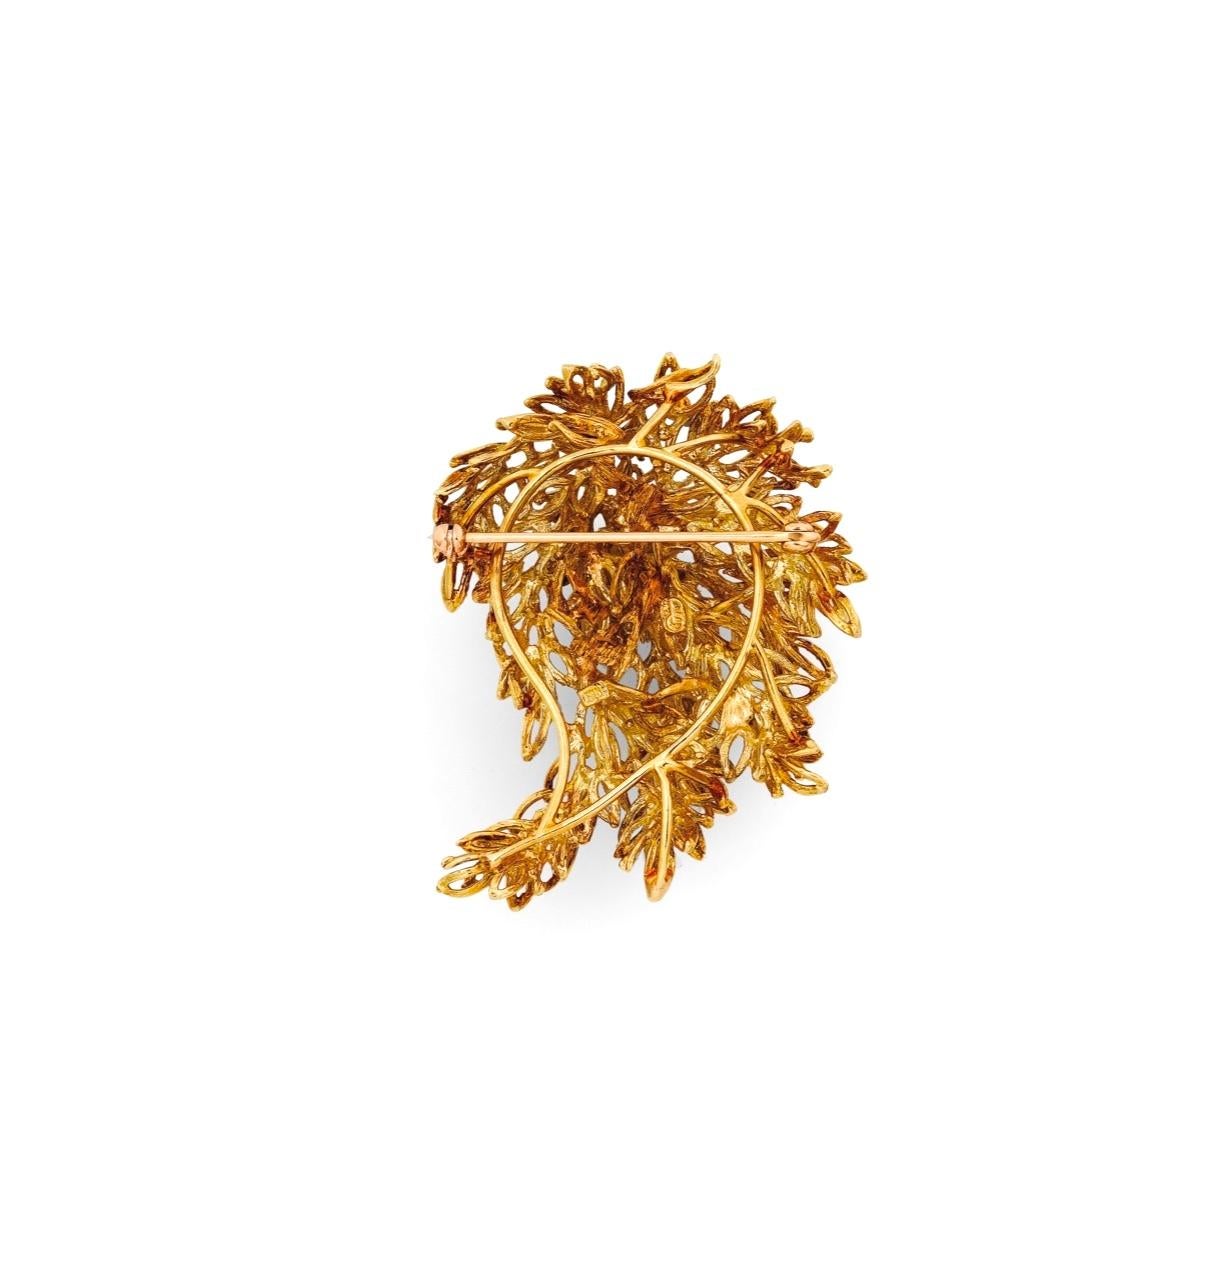 Retro 18K yellow gold Brooch (French halmark for 18K gold) with foliage pattern.
The pattern is embellished with 16 brilliant-cut diamonds for a total weight of approximately 1.50 carats.

Dimensions of the brooch : 41 mm (1.6 inches) X 56 mm (2.2